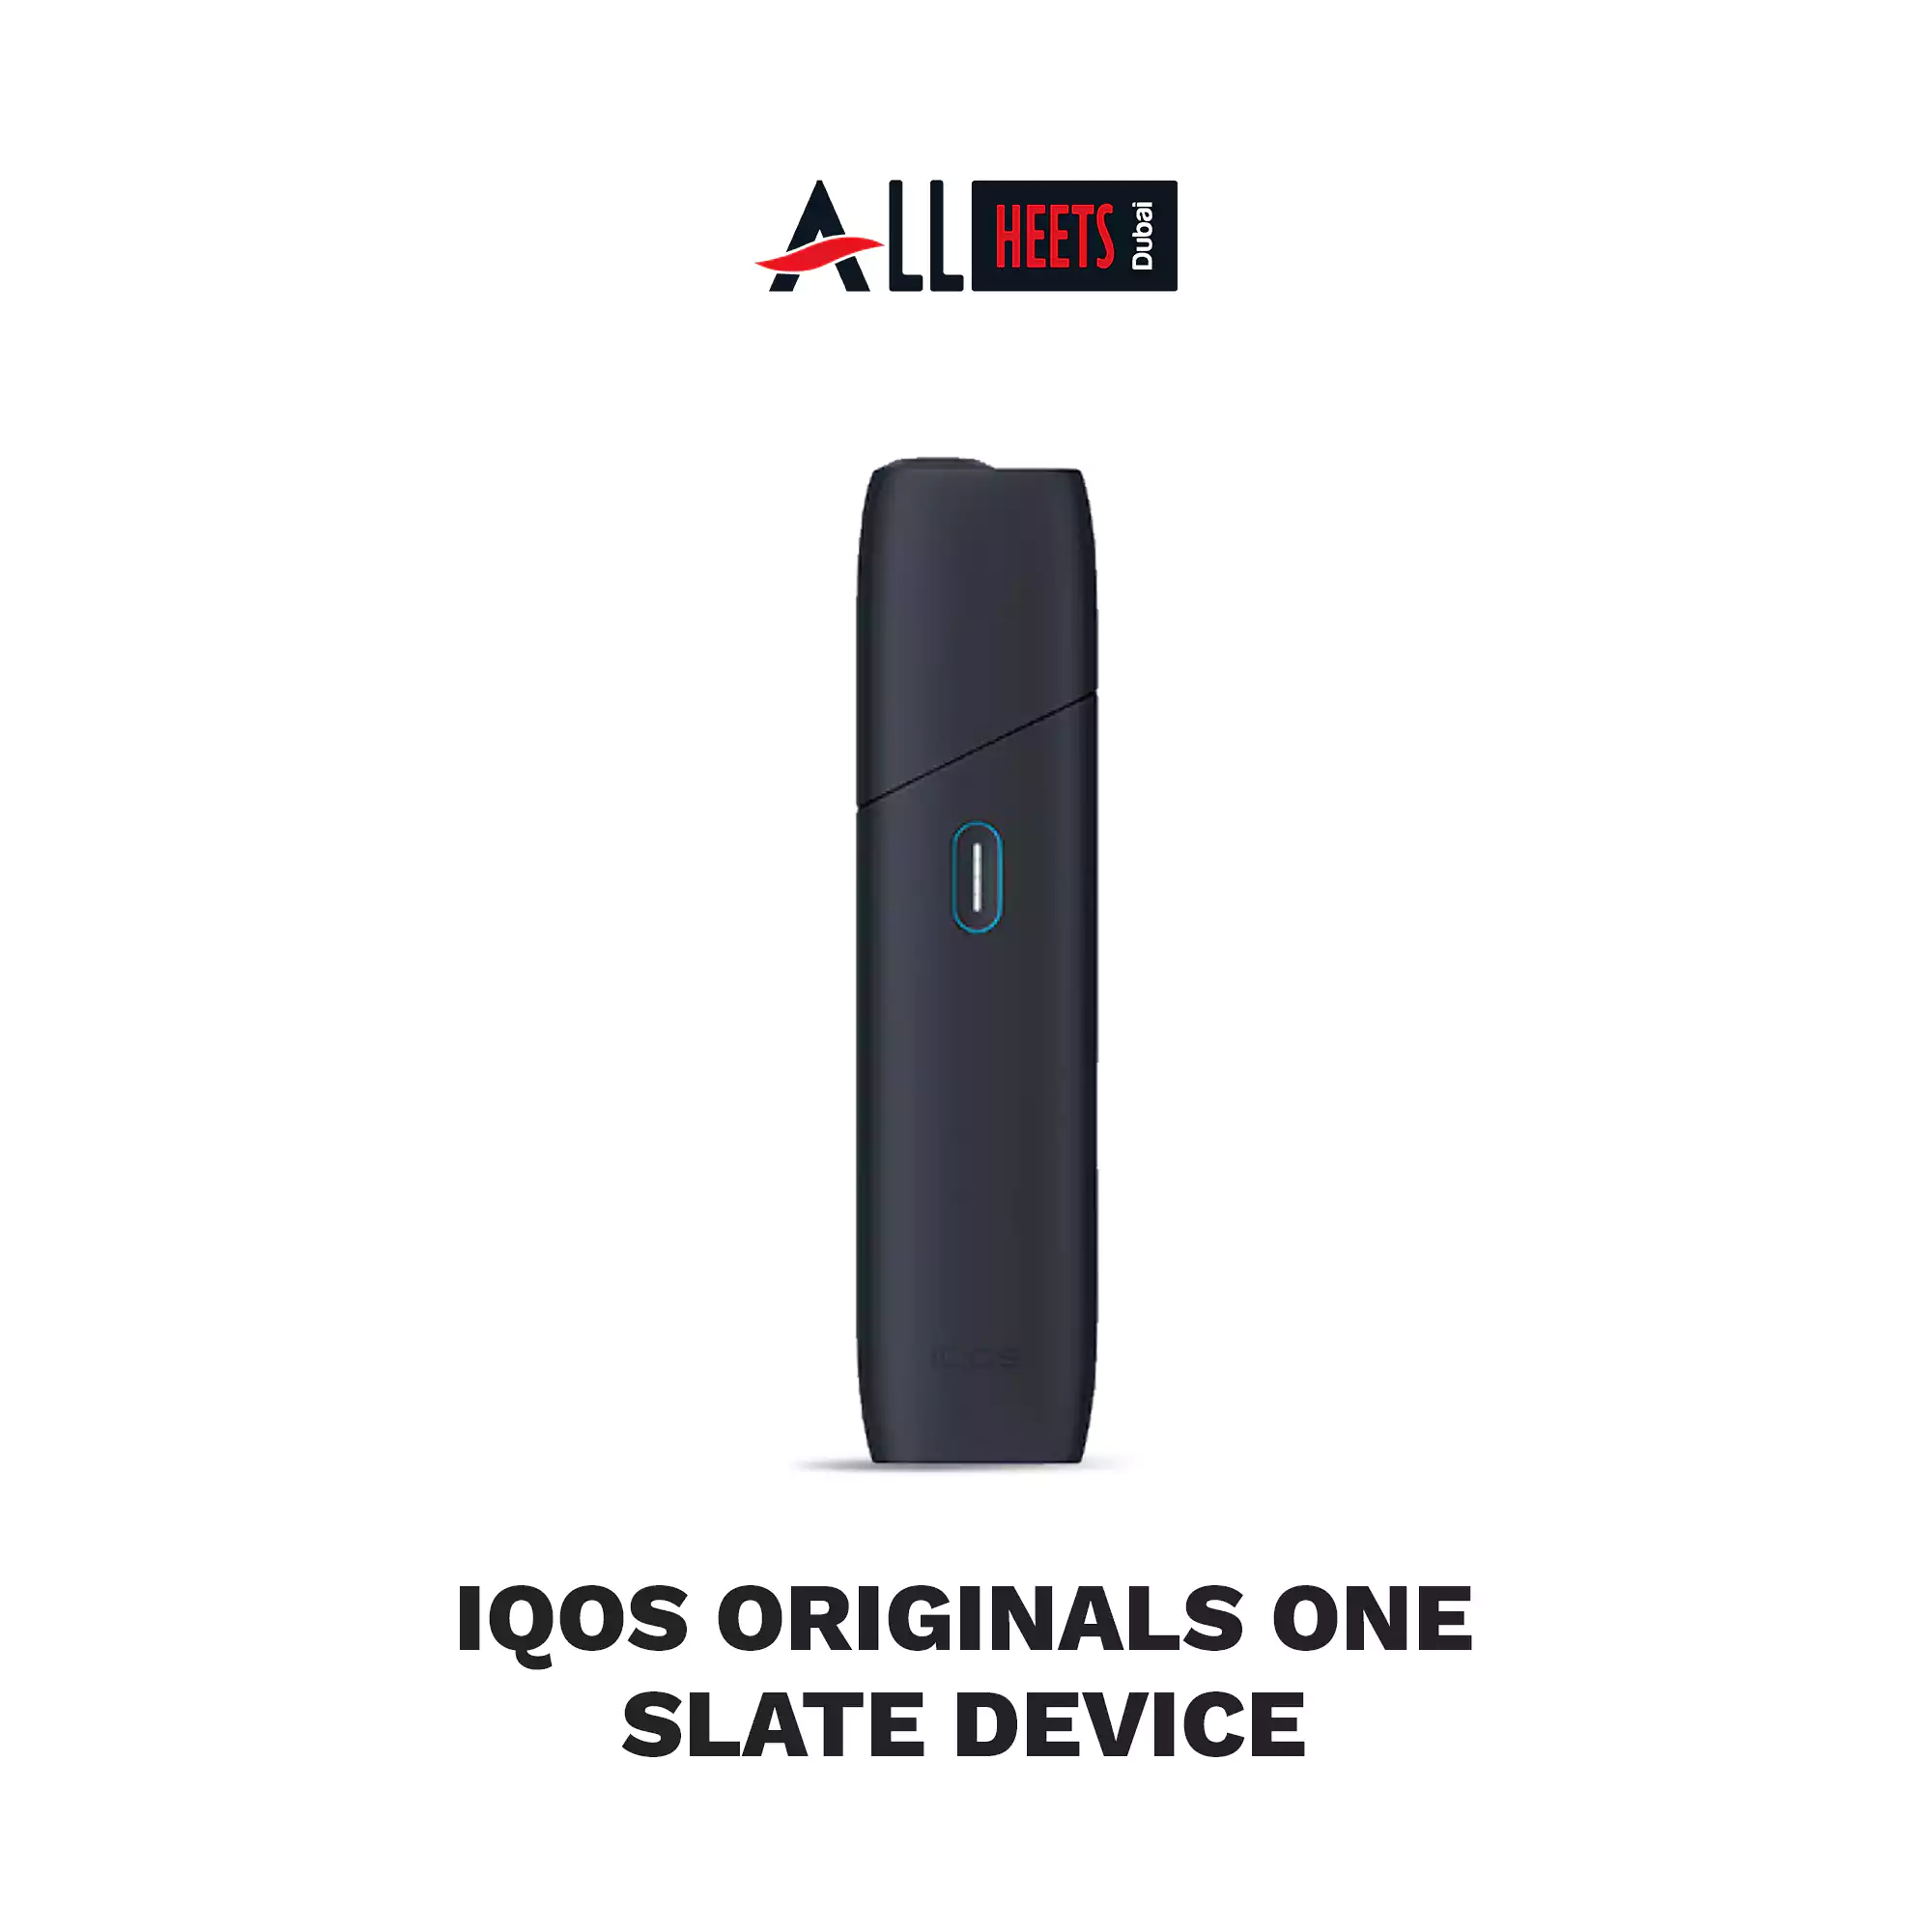 IQOS Originals One Silver Device - heets